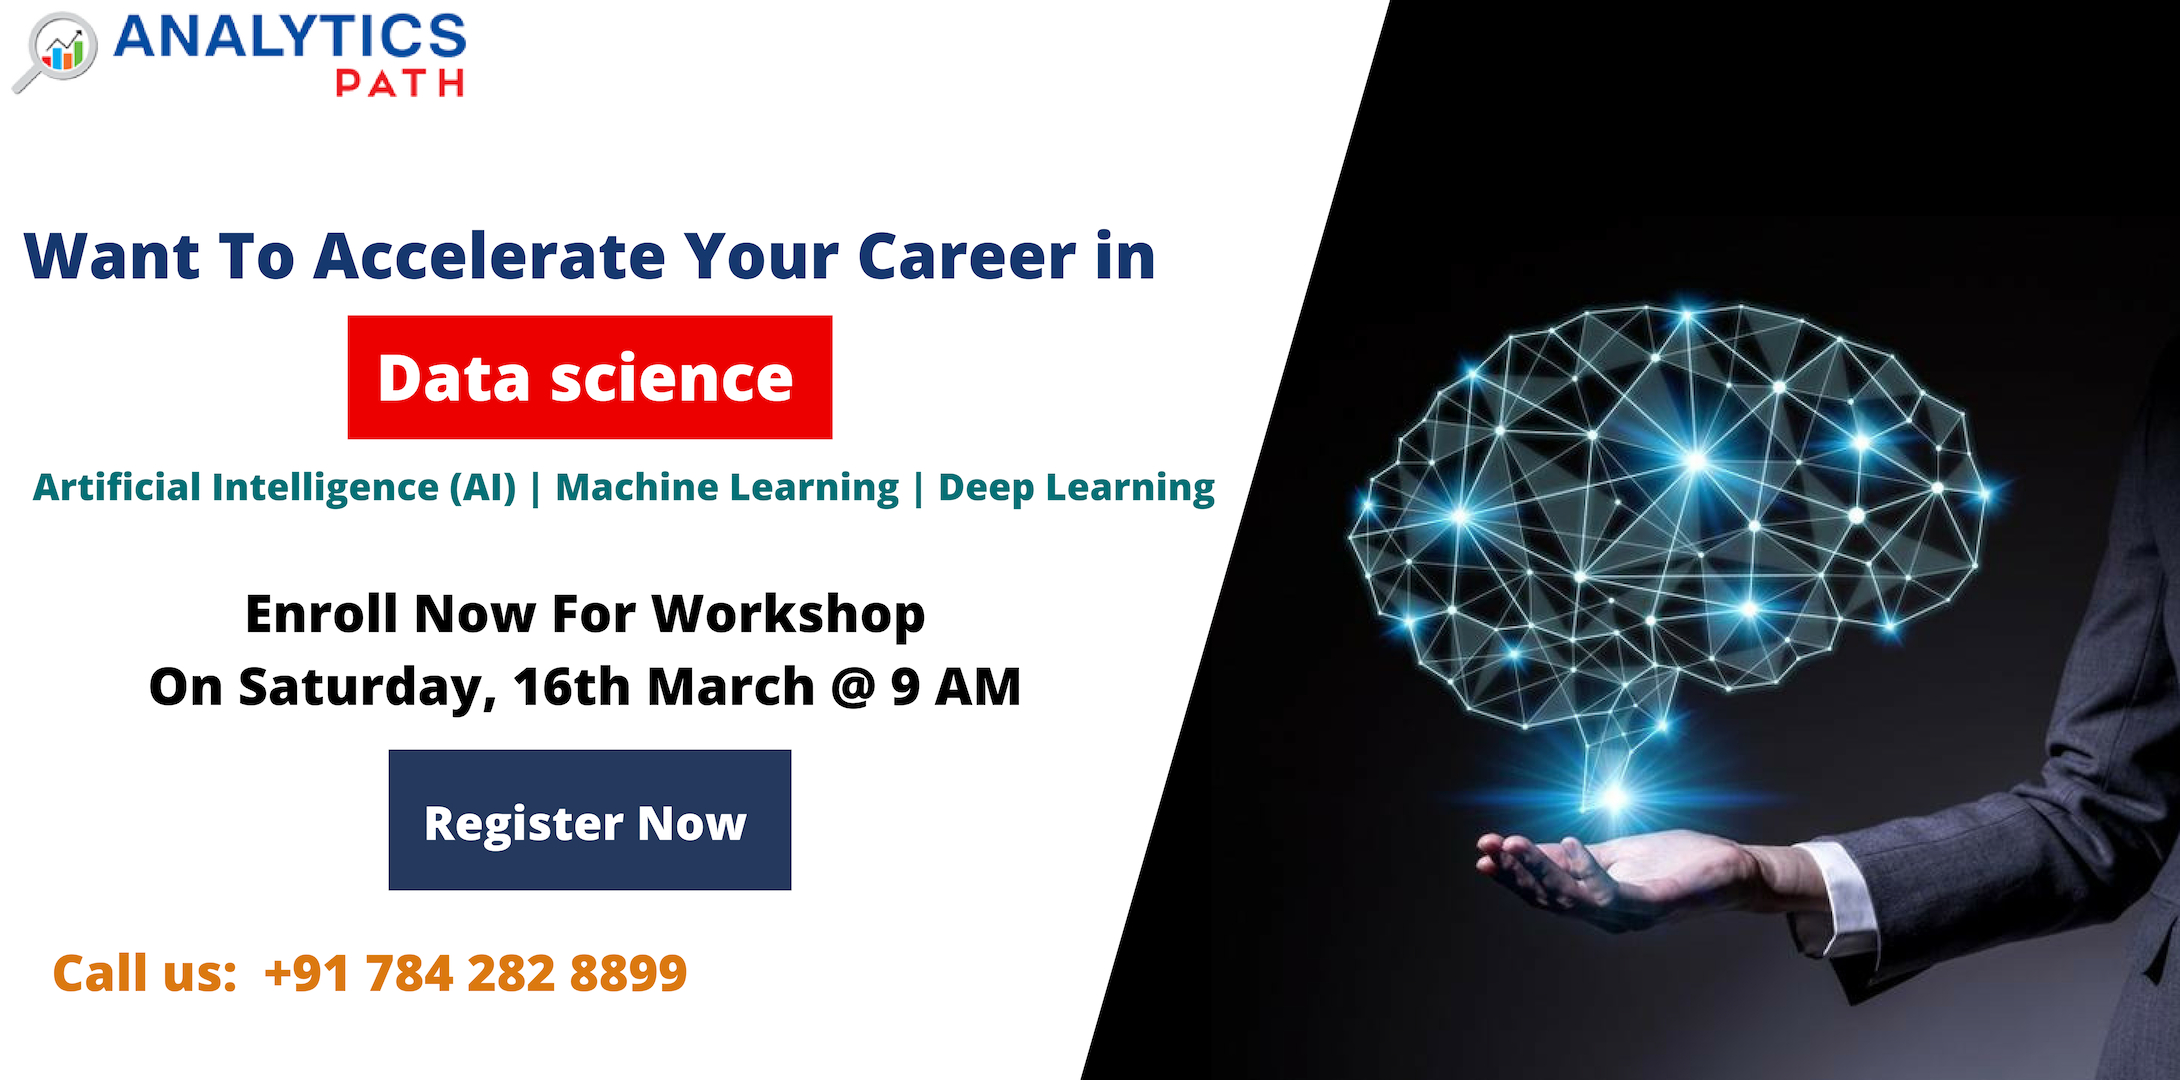 Attend Free Workshop On Data Science Training By Real Time Experts From IIT And IIM At Analytics Path Scheduled On 16th March, 9 AM, In Hyderabad, Hyderabad, Telangana, India